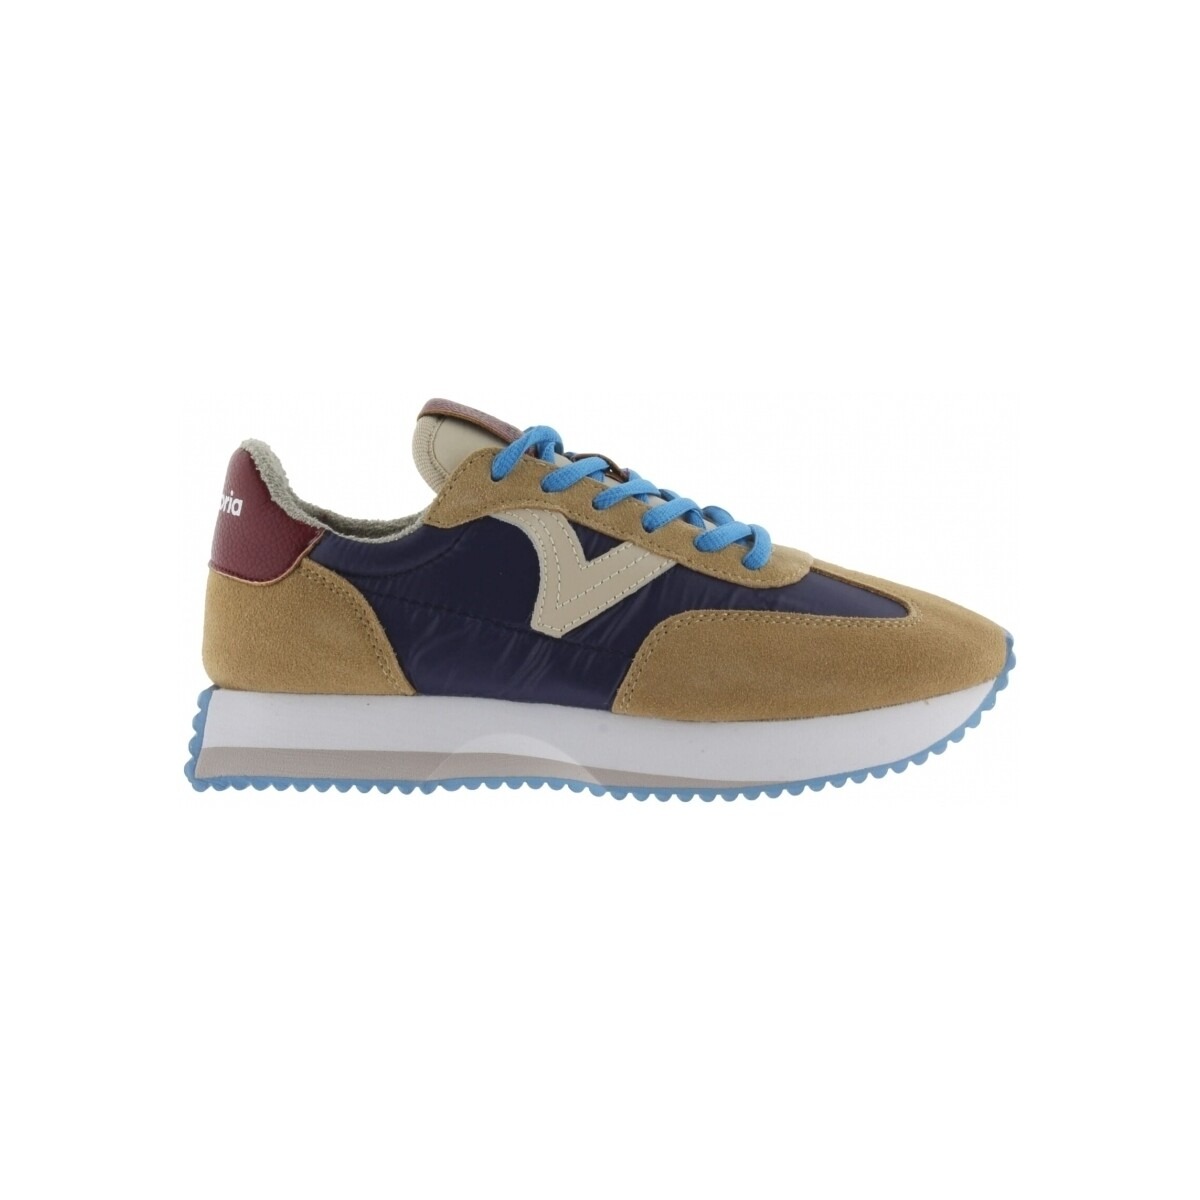 Womens Blue Sneakers at Spartoo GOOFASH